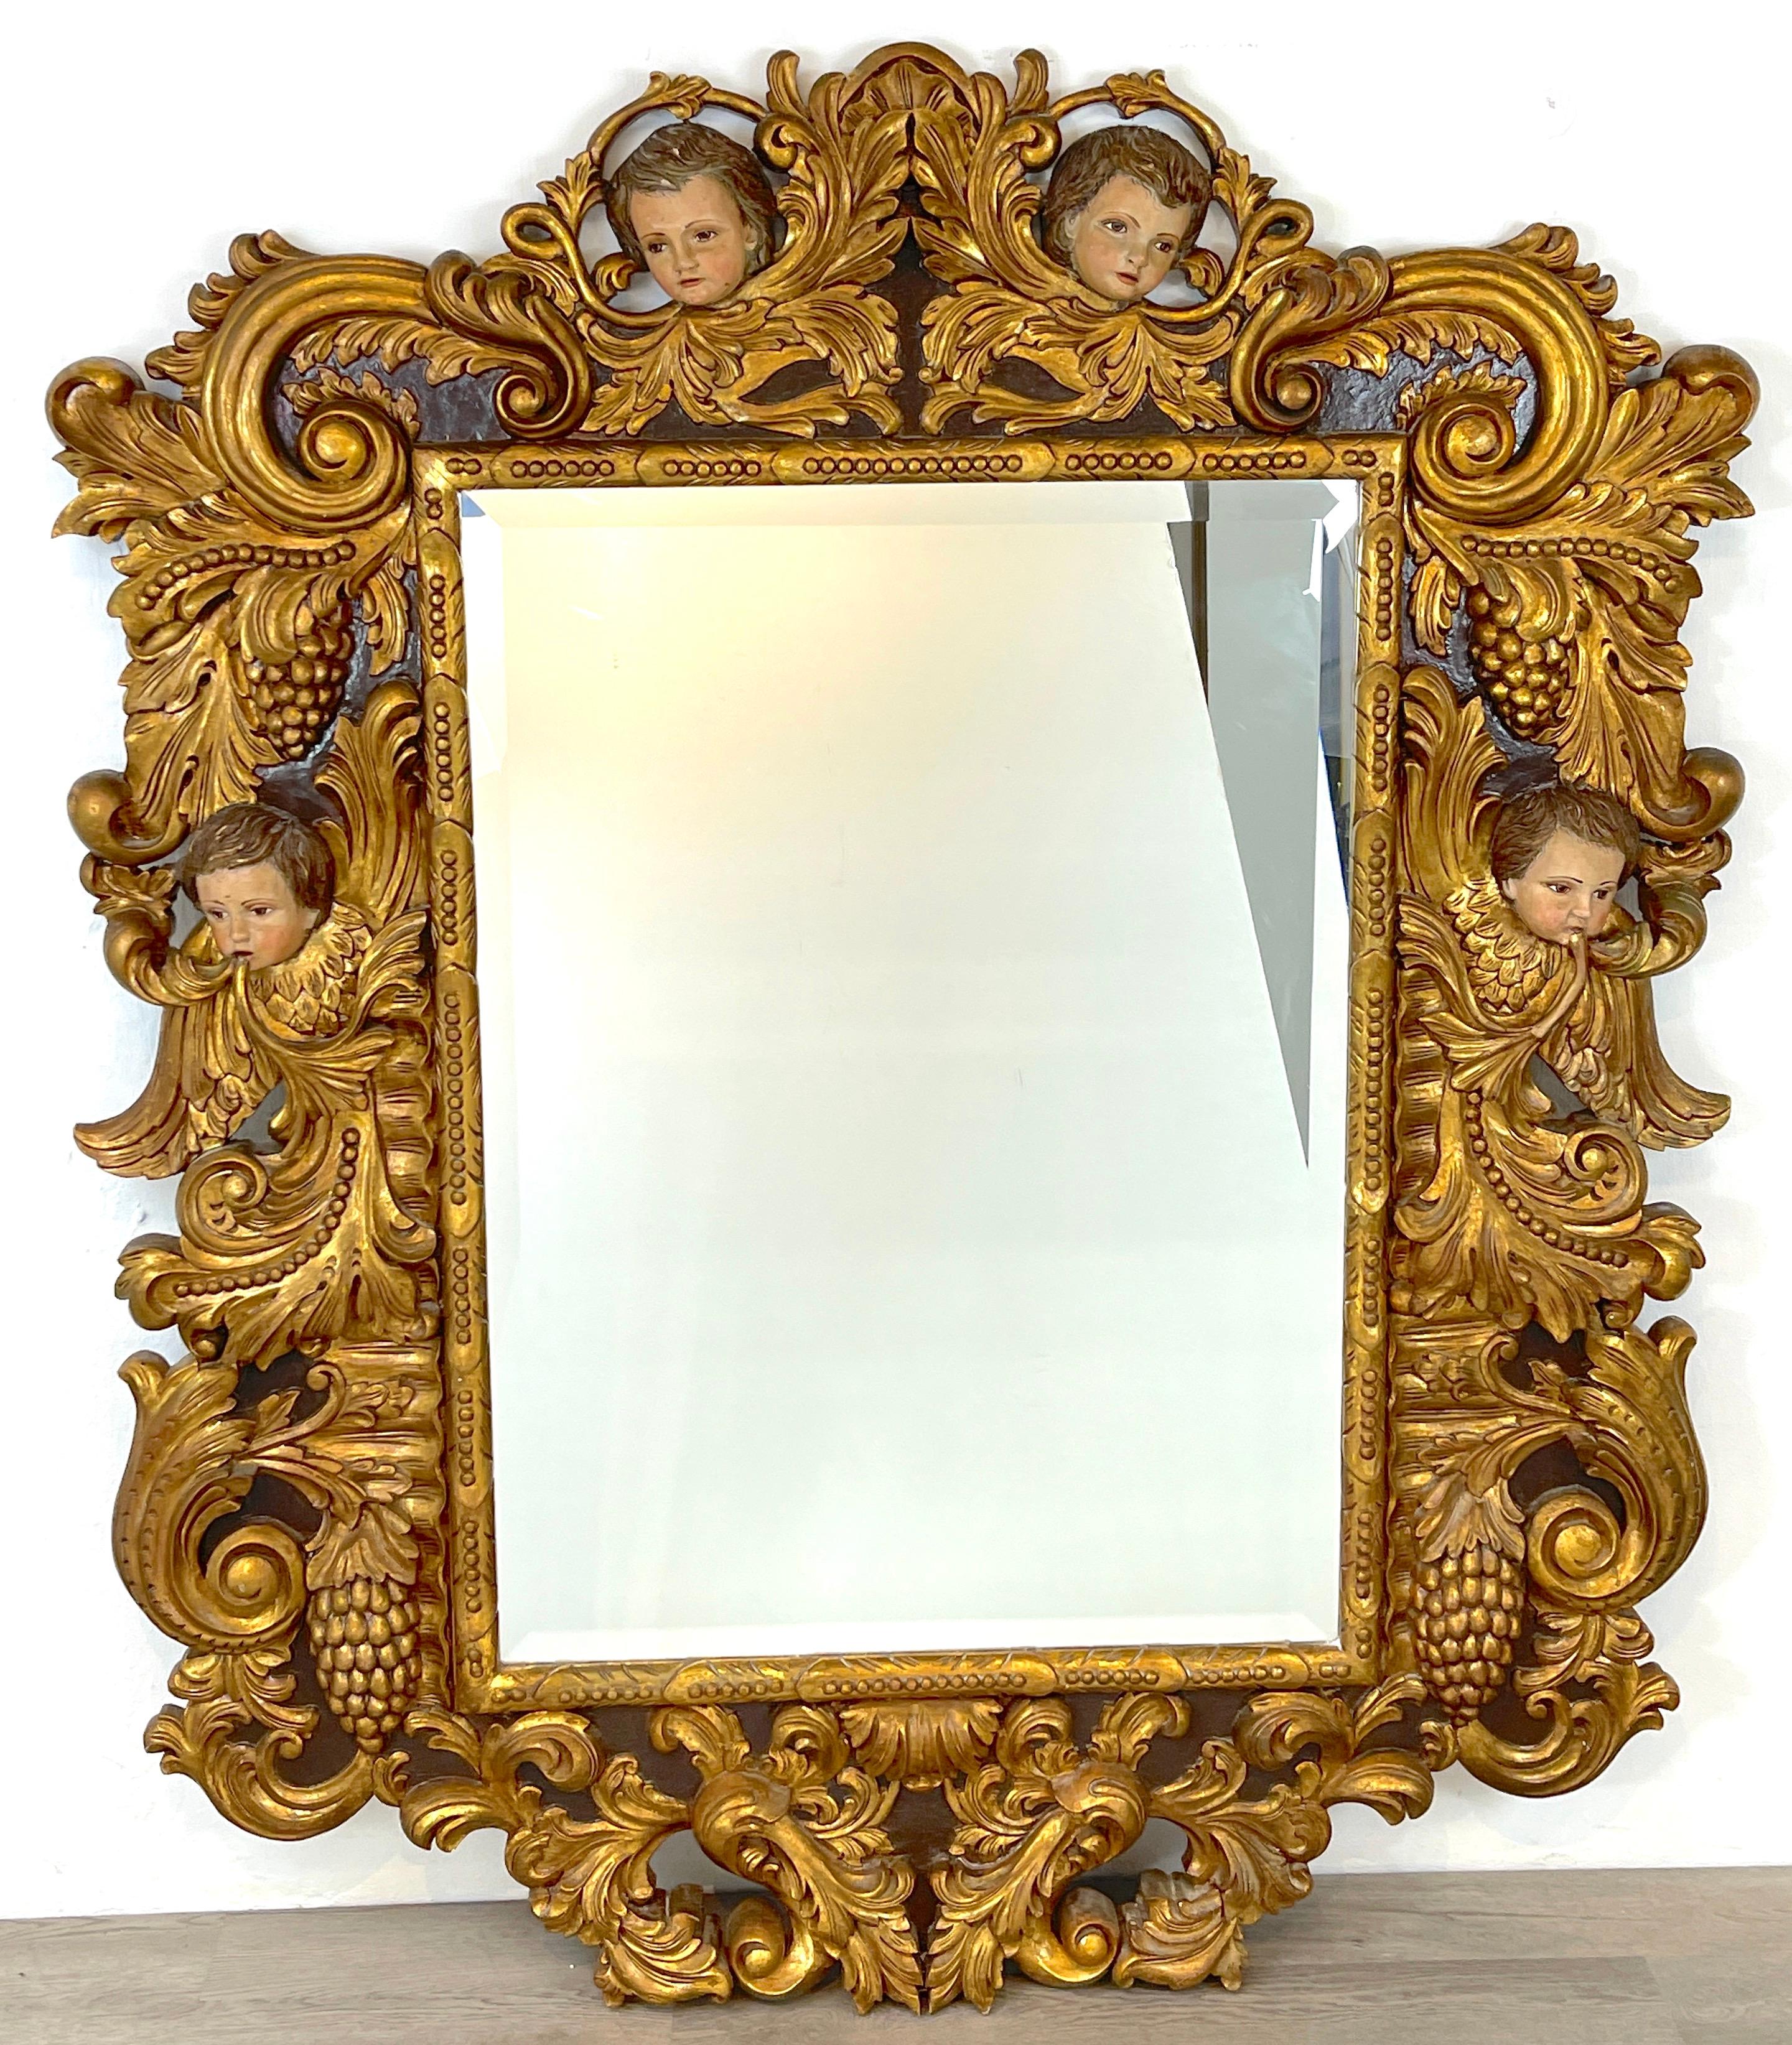 Palatial Italian carved figural giltwood & polychromed Baroque style mirror, with four carved putti heads with inset glass eyes, amongst giltwood foliate background. With inset 43